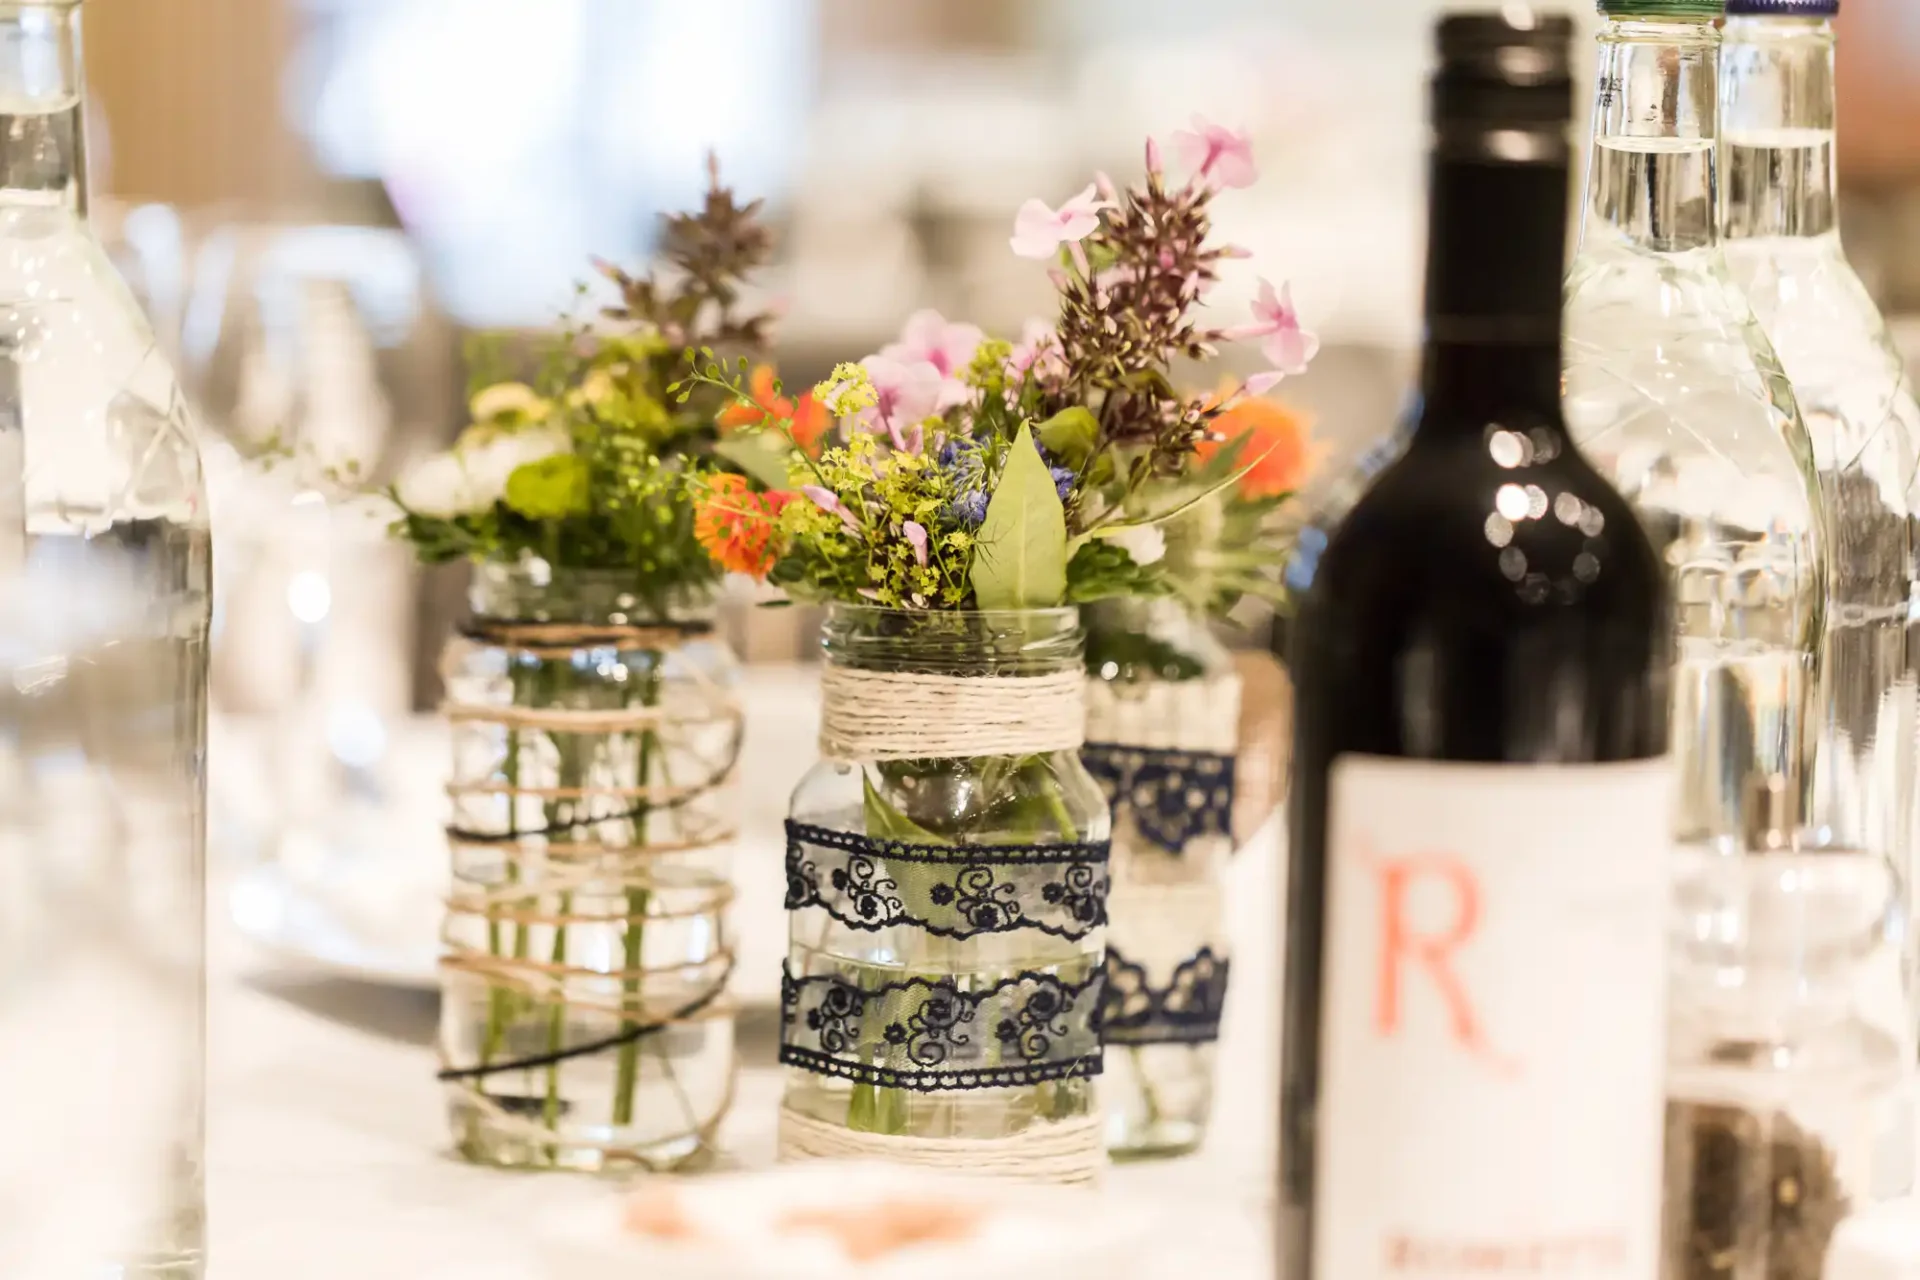 Table setting with small floral arrangements in glass jars, a water bottle, and a wine bottle labeled with the letter 'r'.